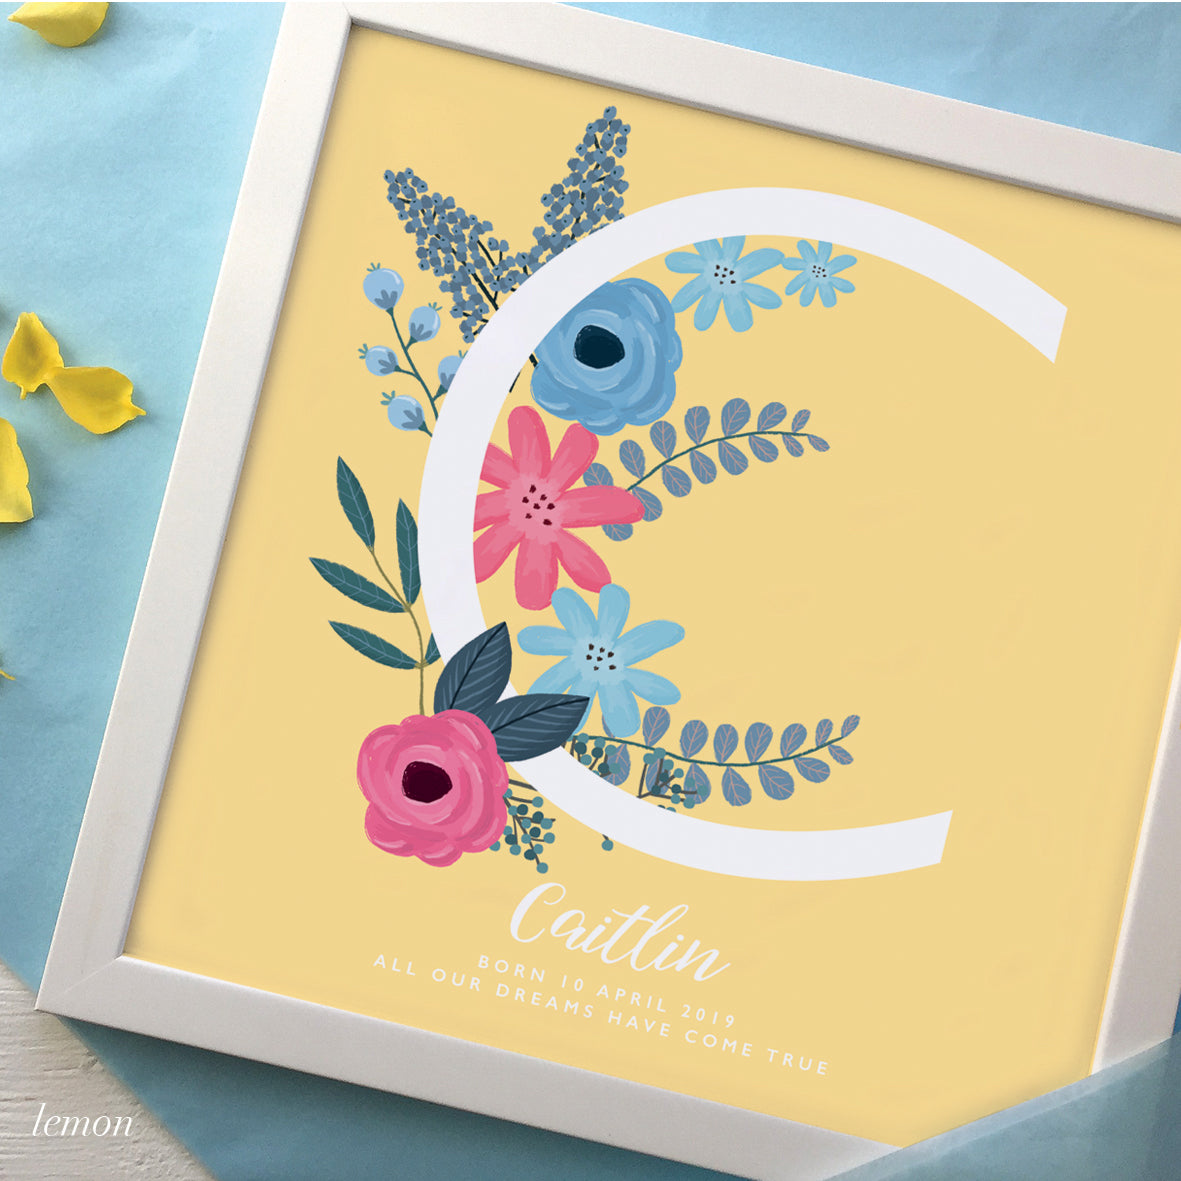 New Baby gift with large letter C and dainty flowers in a white frame